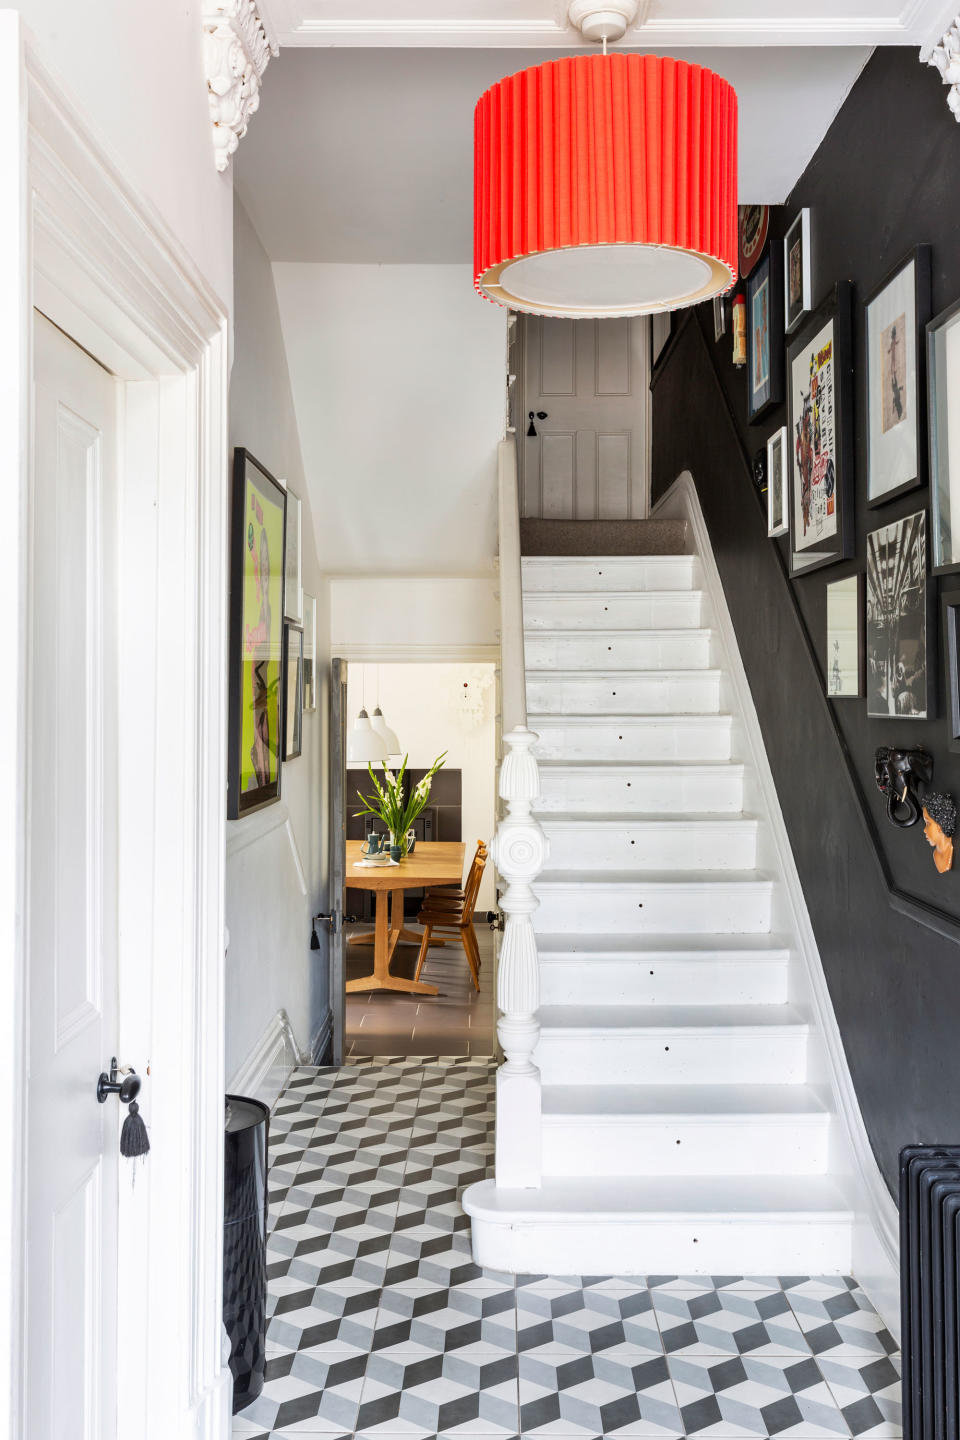 <p> Now if you are totally redesigning a traditional hallway, rather than just&#xA0;redecorating, flooring is what you are going to be wanting to think about first. </p> <p> We cover loads of different options here but do consider your flooring as a way to bring in some style and color to the space, as well as being a practical choice. </p> <p> For us, that means tiles. They are easy to clean, can handle wear and tear, but look gorgeous too. And you can always soften them up by throwing down a runner.&#xA0; </p>